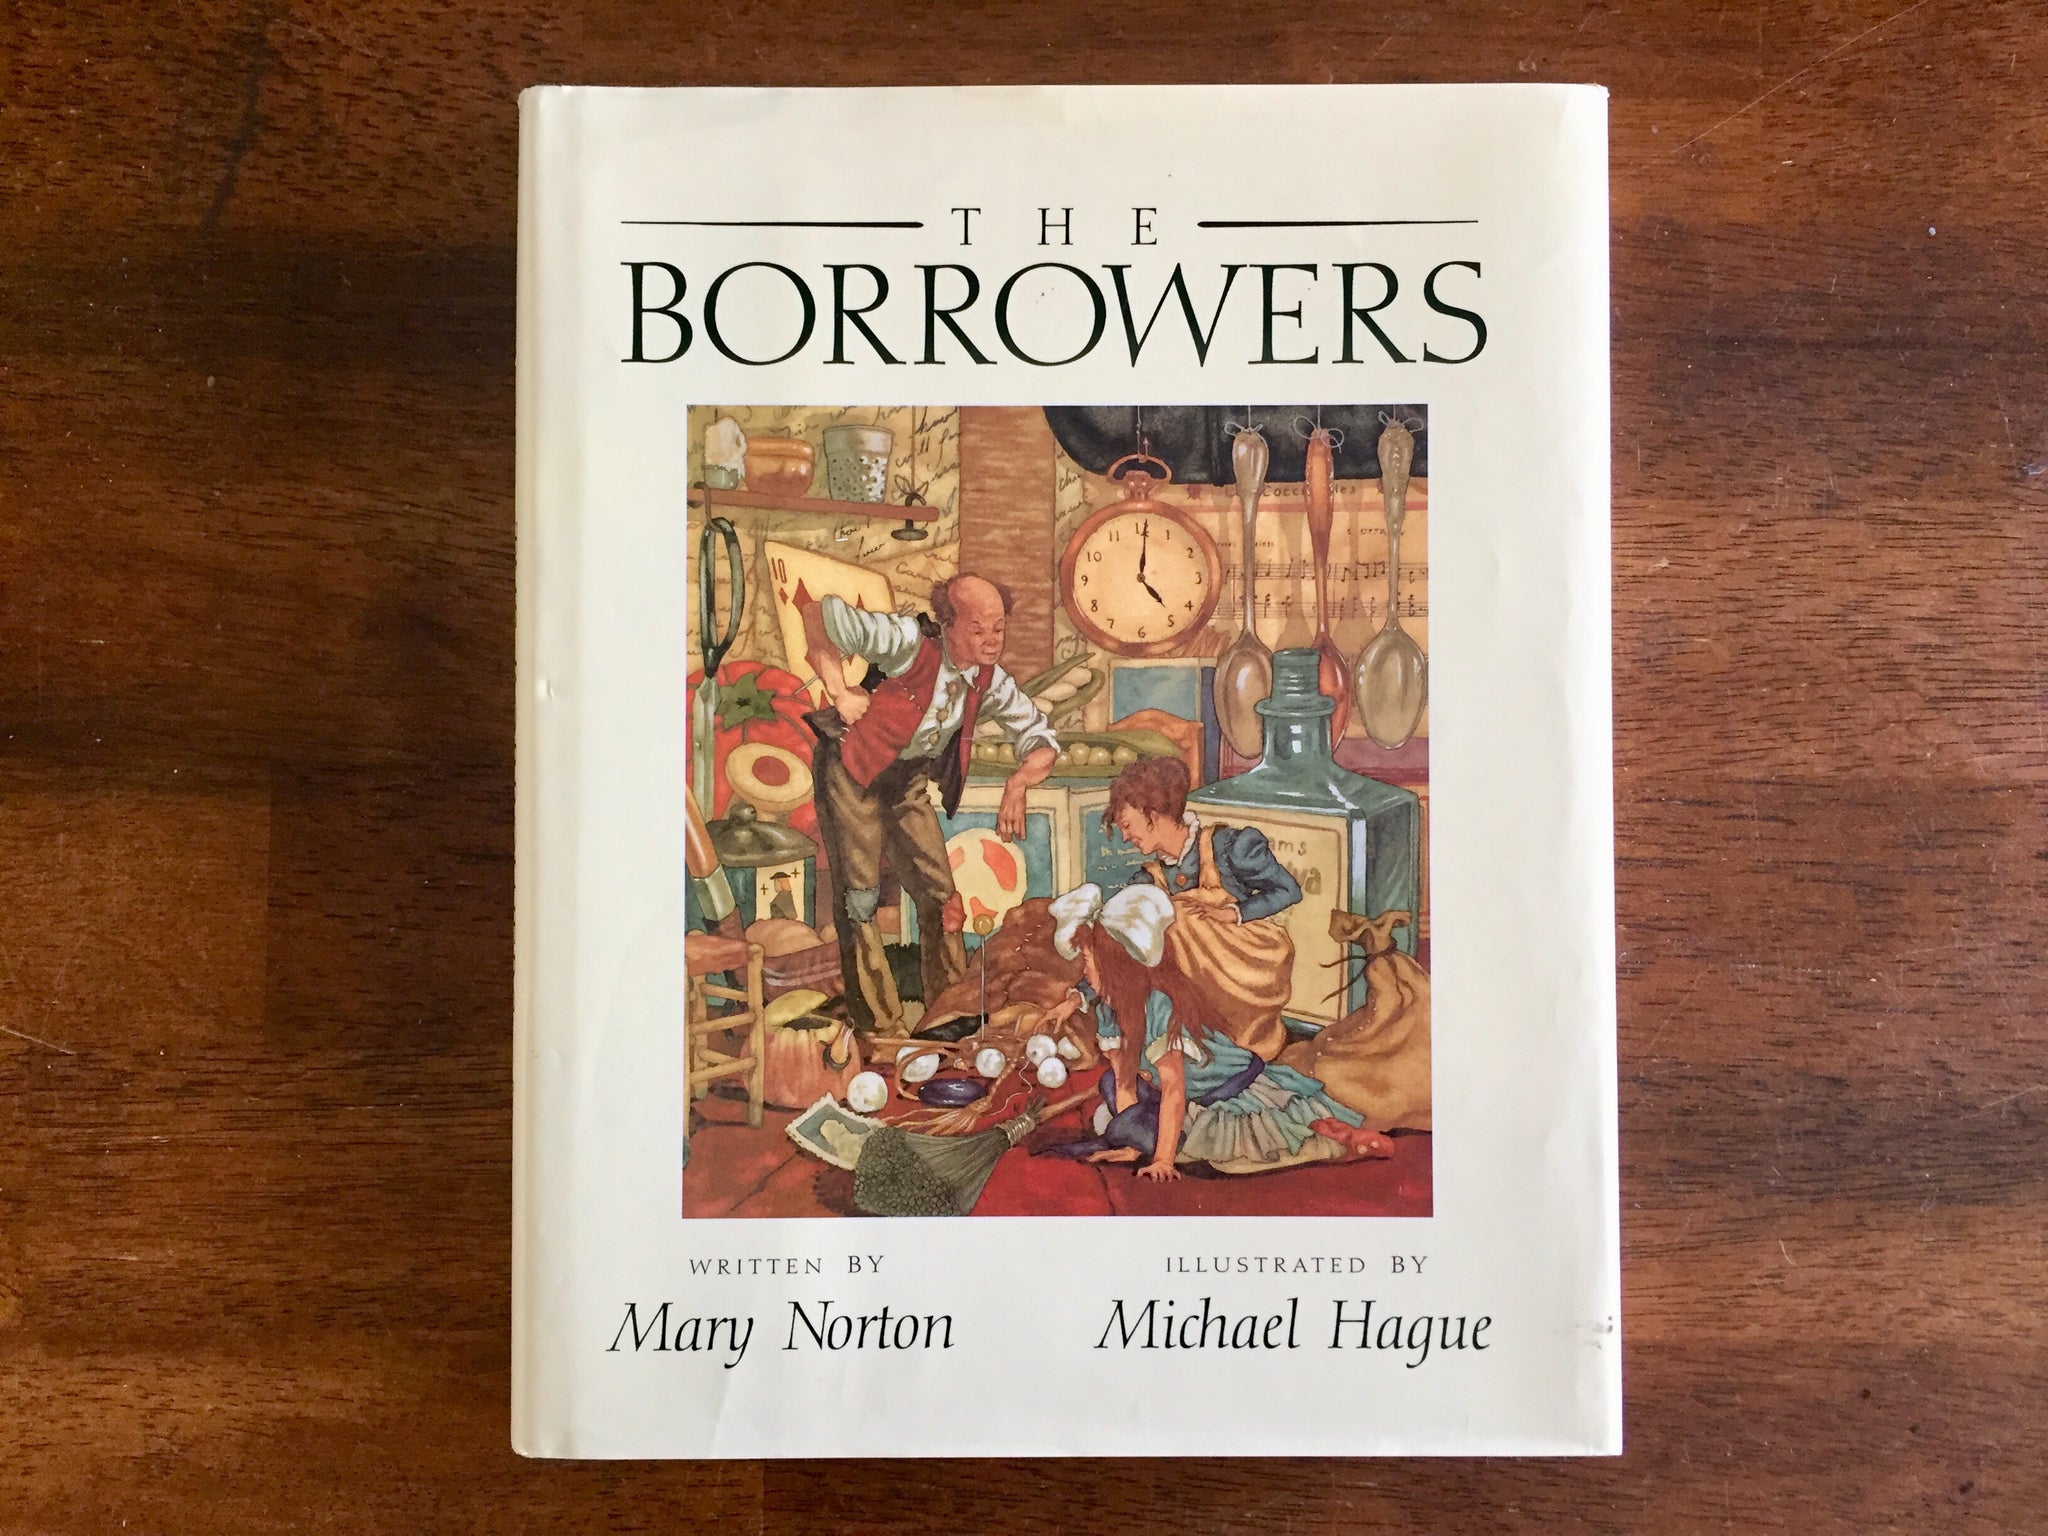 The Borrowers by Mary Norton, Illustrated by Michael Hague